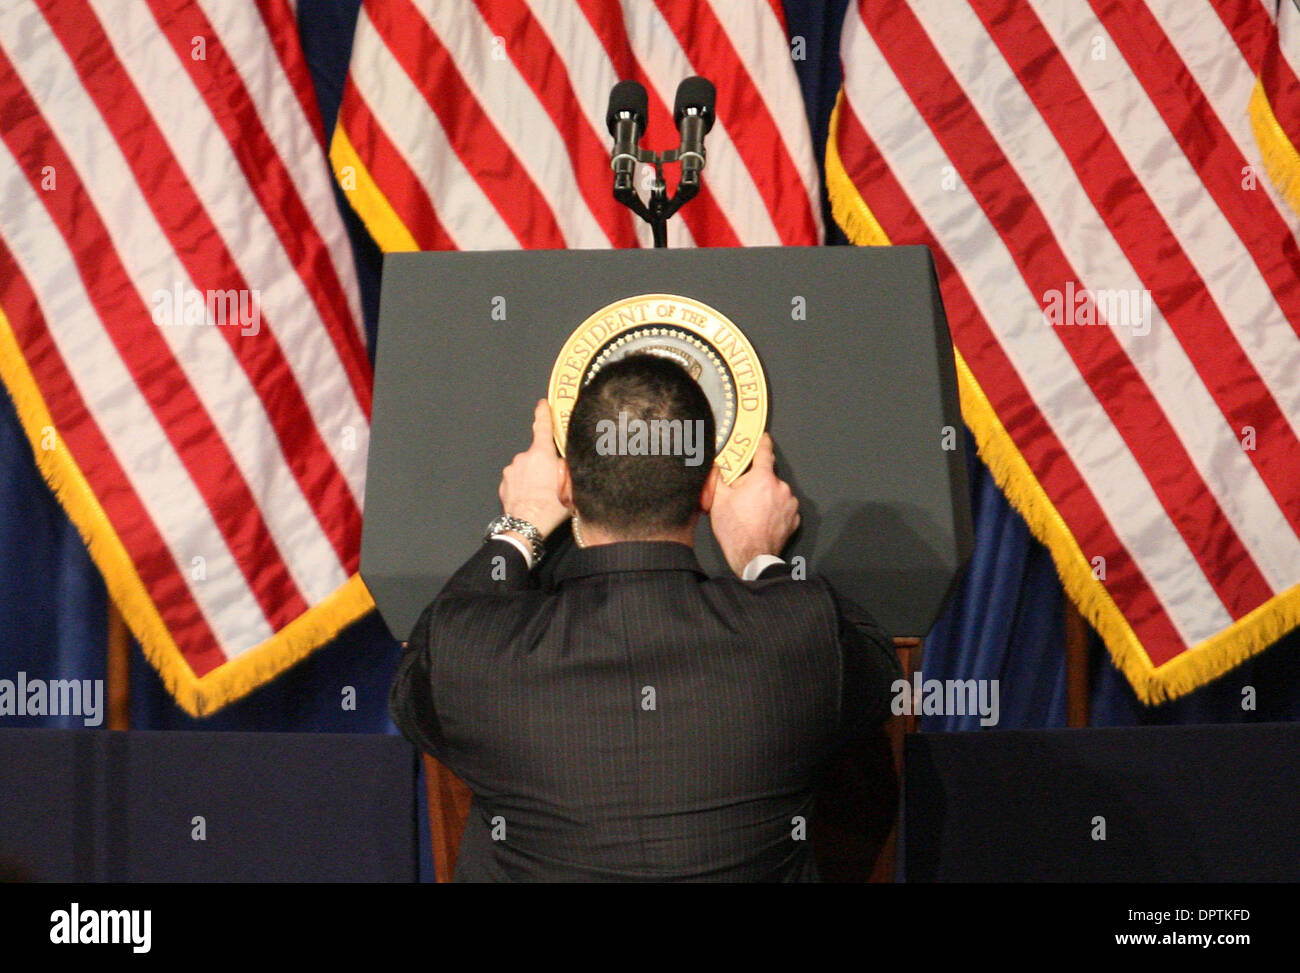 Feb 18, 2009 - Mesa, Arizona, USA - A White House aid places the Presidential seal on the podium before President Obama addresses the audience at Dobson High School. President Obama was in town because Arizona has the third highest foreclosure rate in America. .  (Credit Image: © Darryl Webb/East Valley Tribune/ZUMA Press) Stock Photo